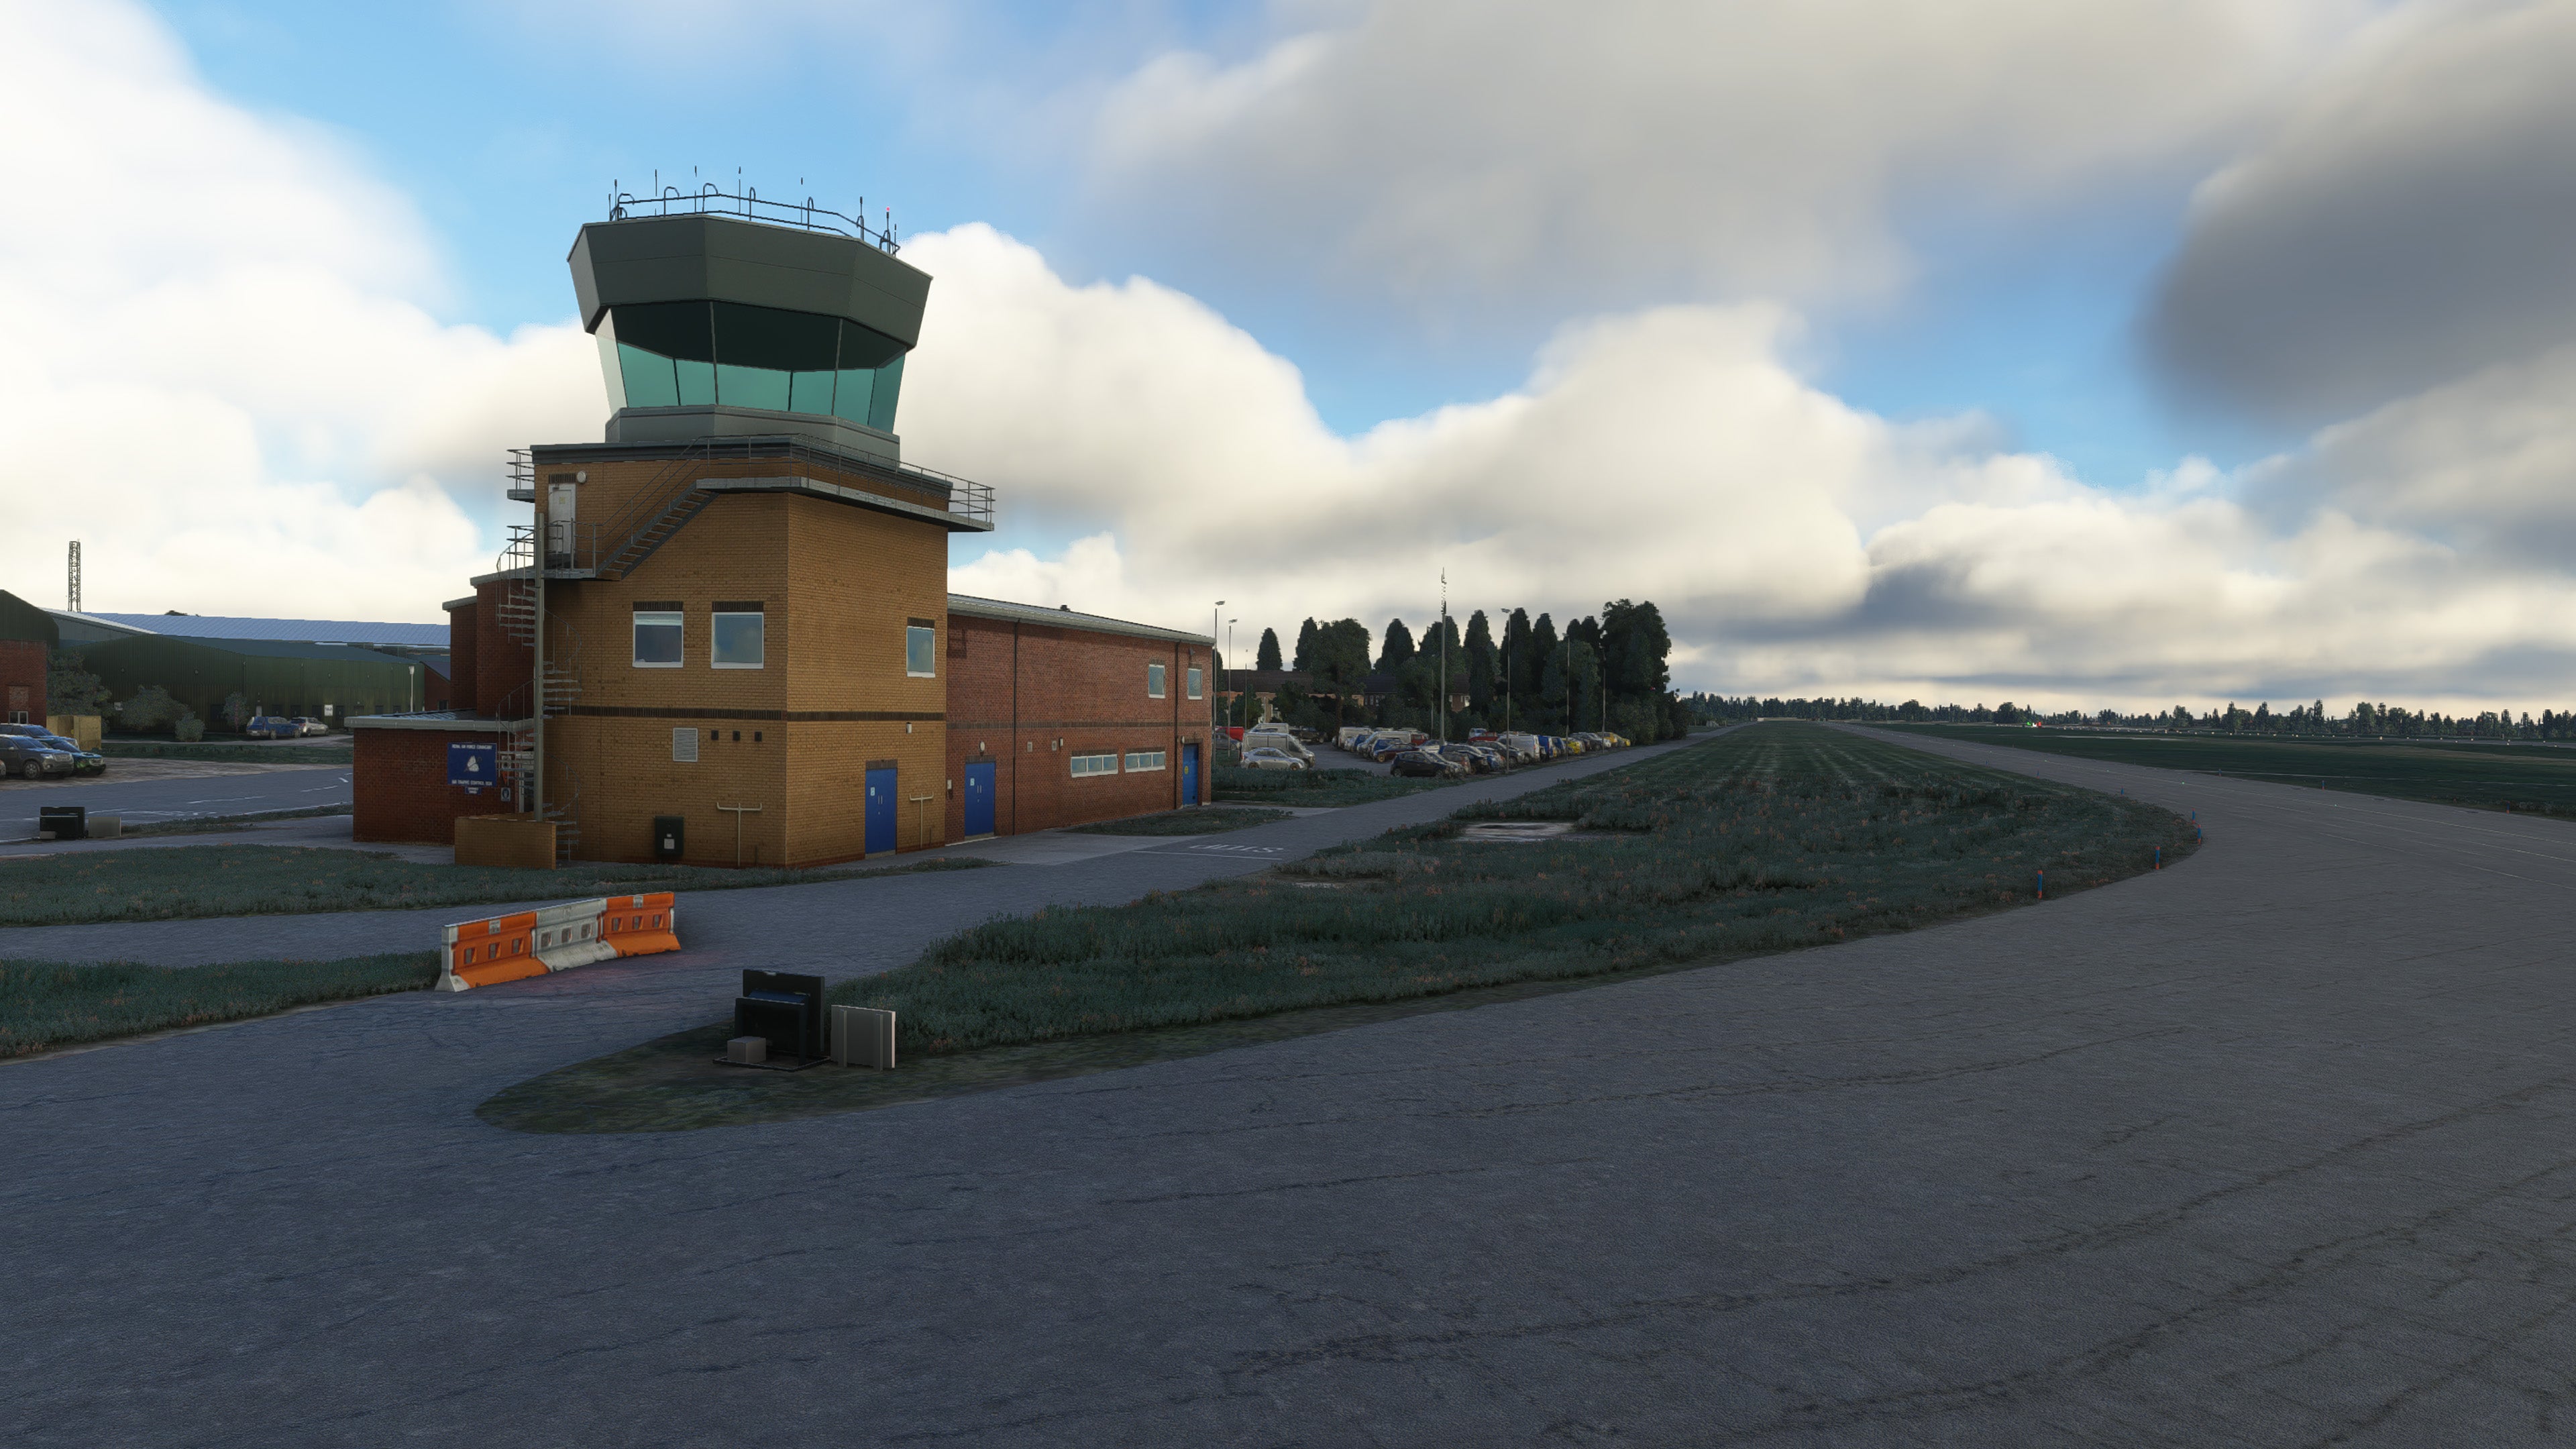 IM Scenery - Coningsby Air Base EGXC for MSFS